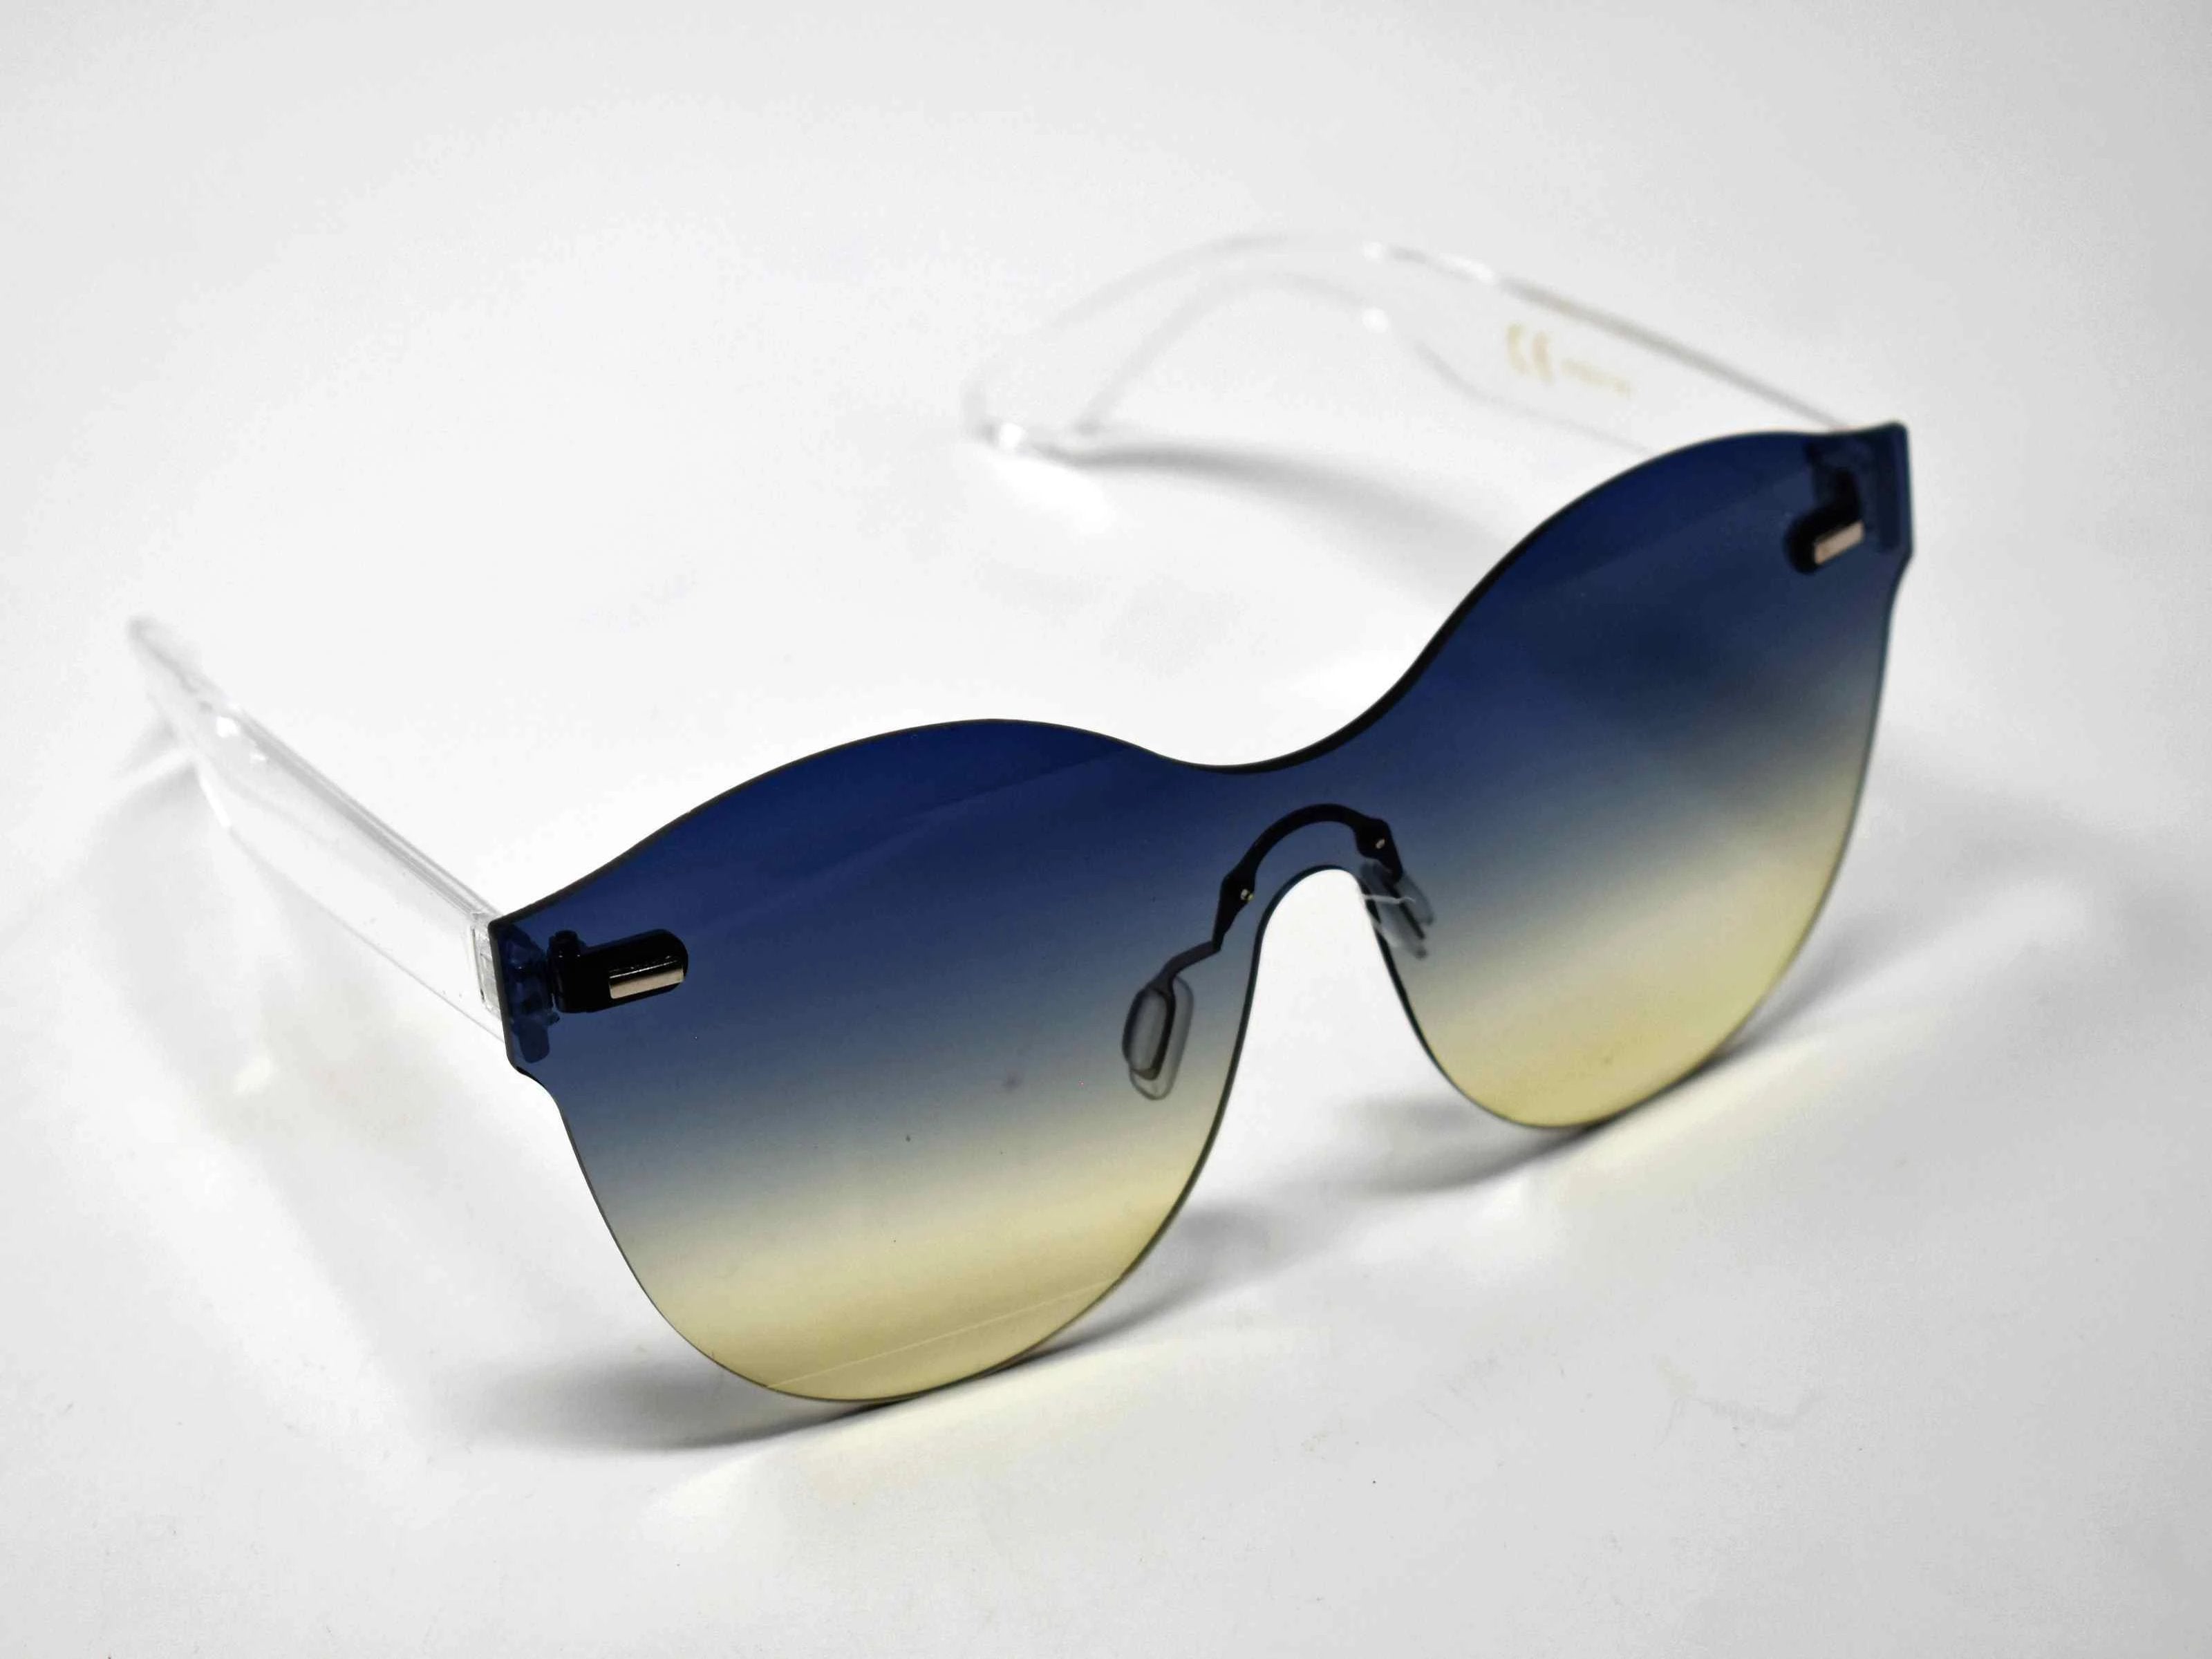 Its just a good vibe in these sage no rim sunglass frames with a blue to cream ombre lens.